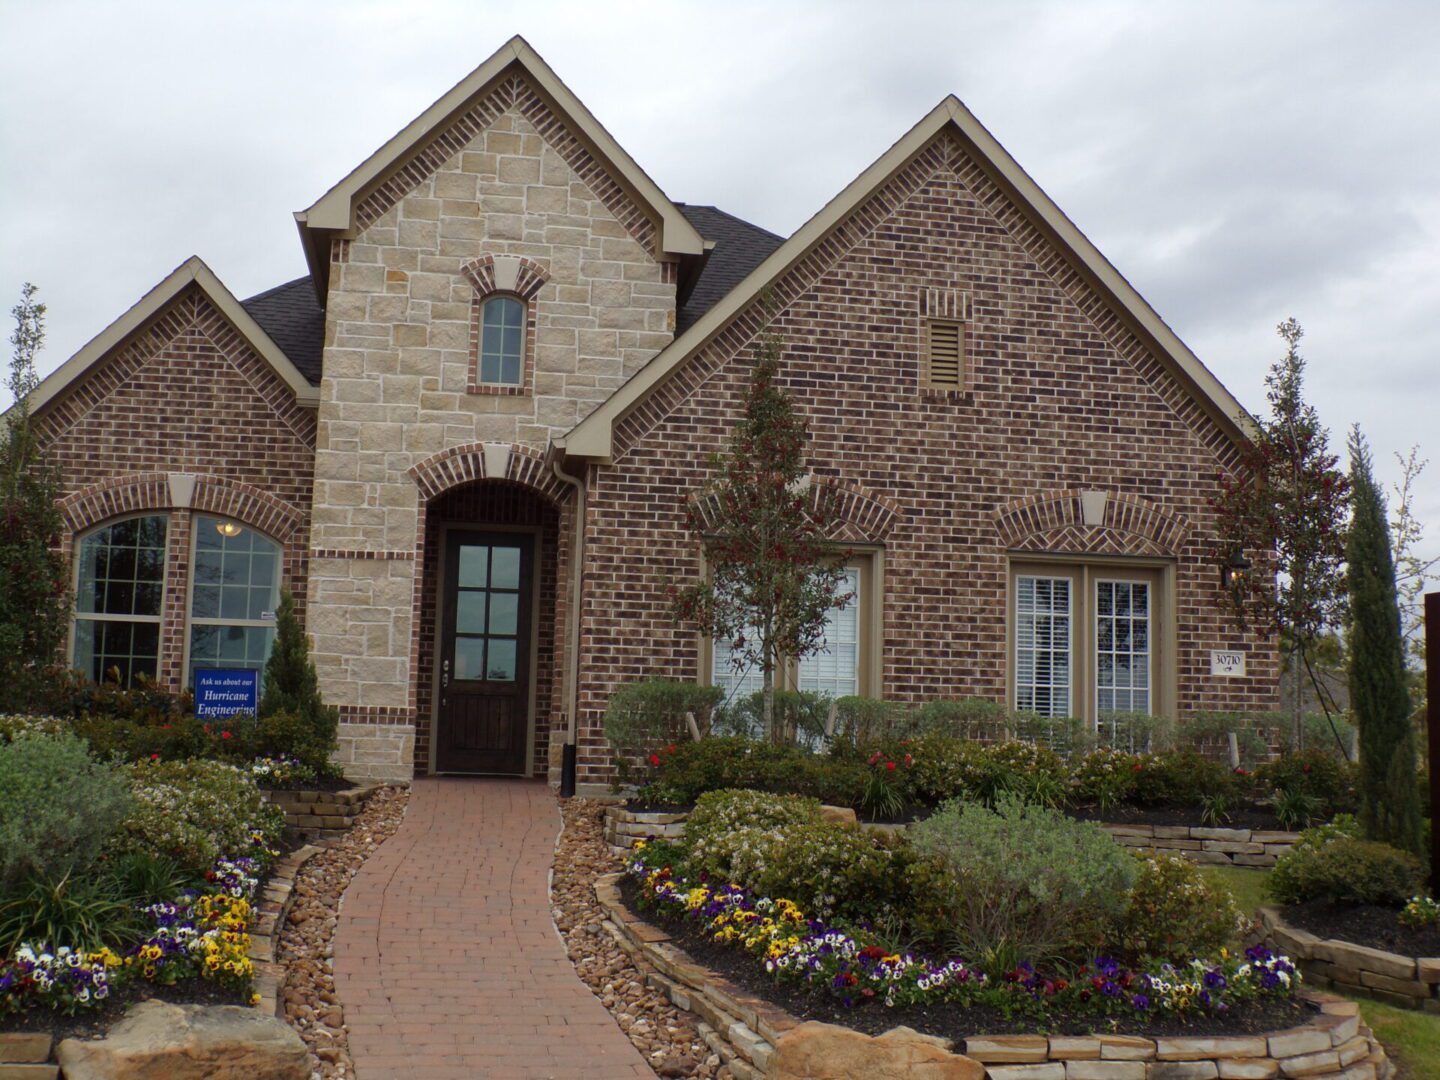 A stone facade two-story house with a landscaped garden and a brick pathway leading to a wooden front door, under a cloudy sky, constructed by Texas builders.